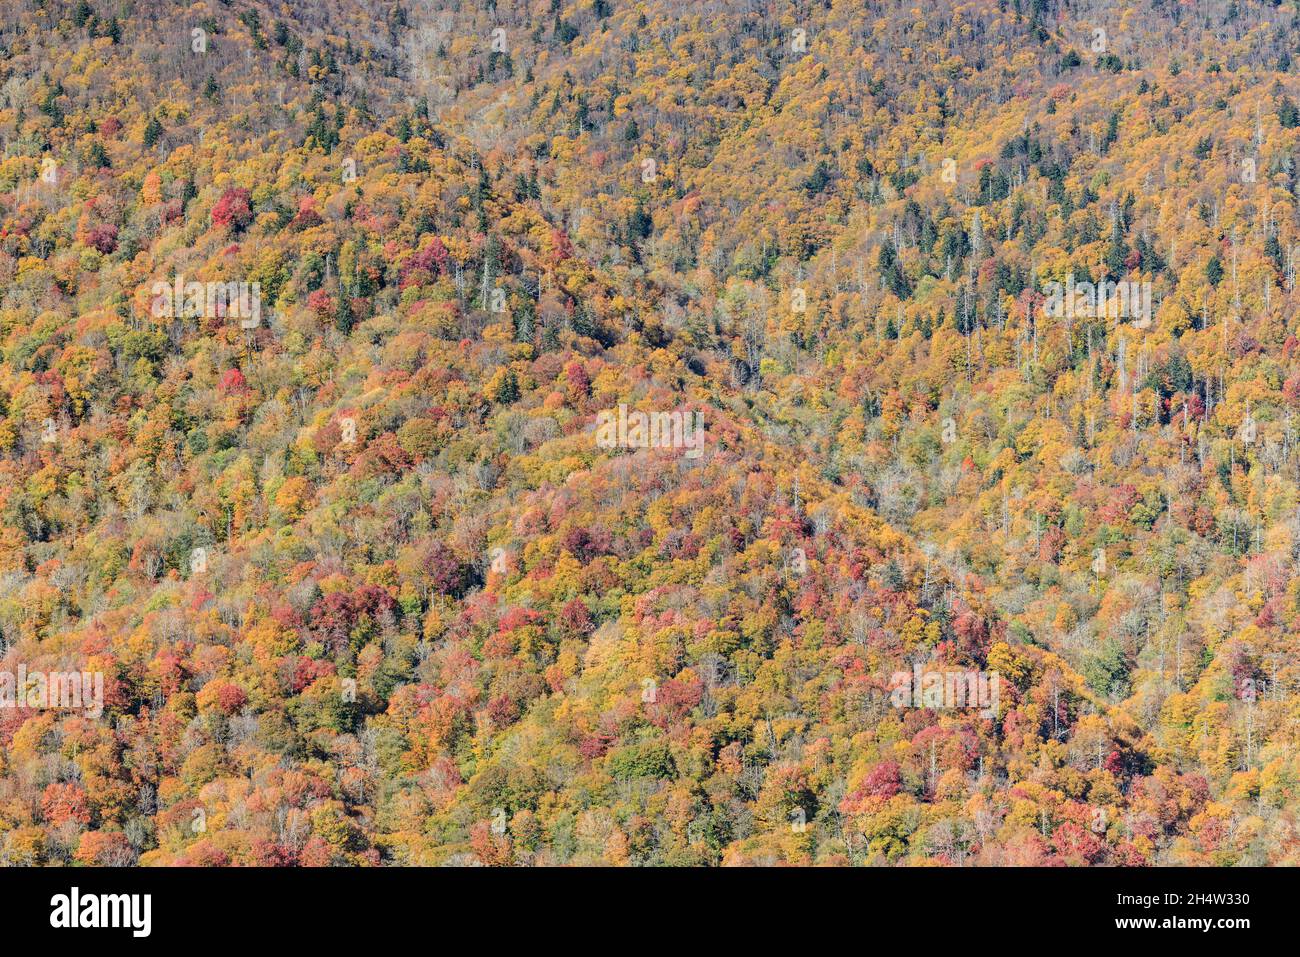 A distant view of trees in near peak fall foliage colors as viewed from Newfound Gap Road in Great Smoky Mountains National Park. Stock Photo